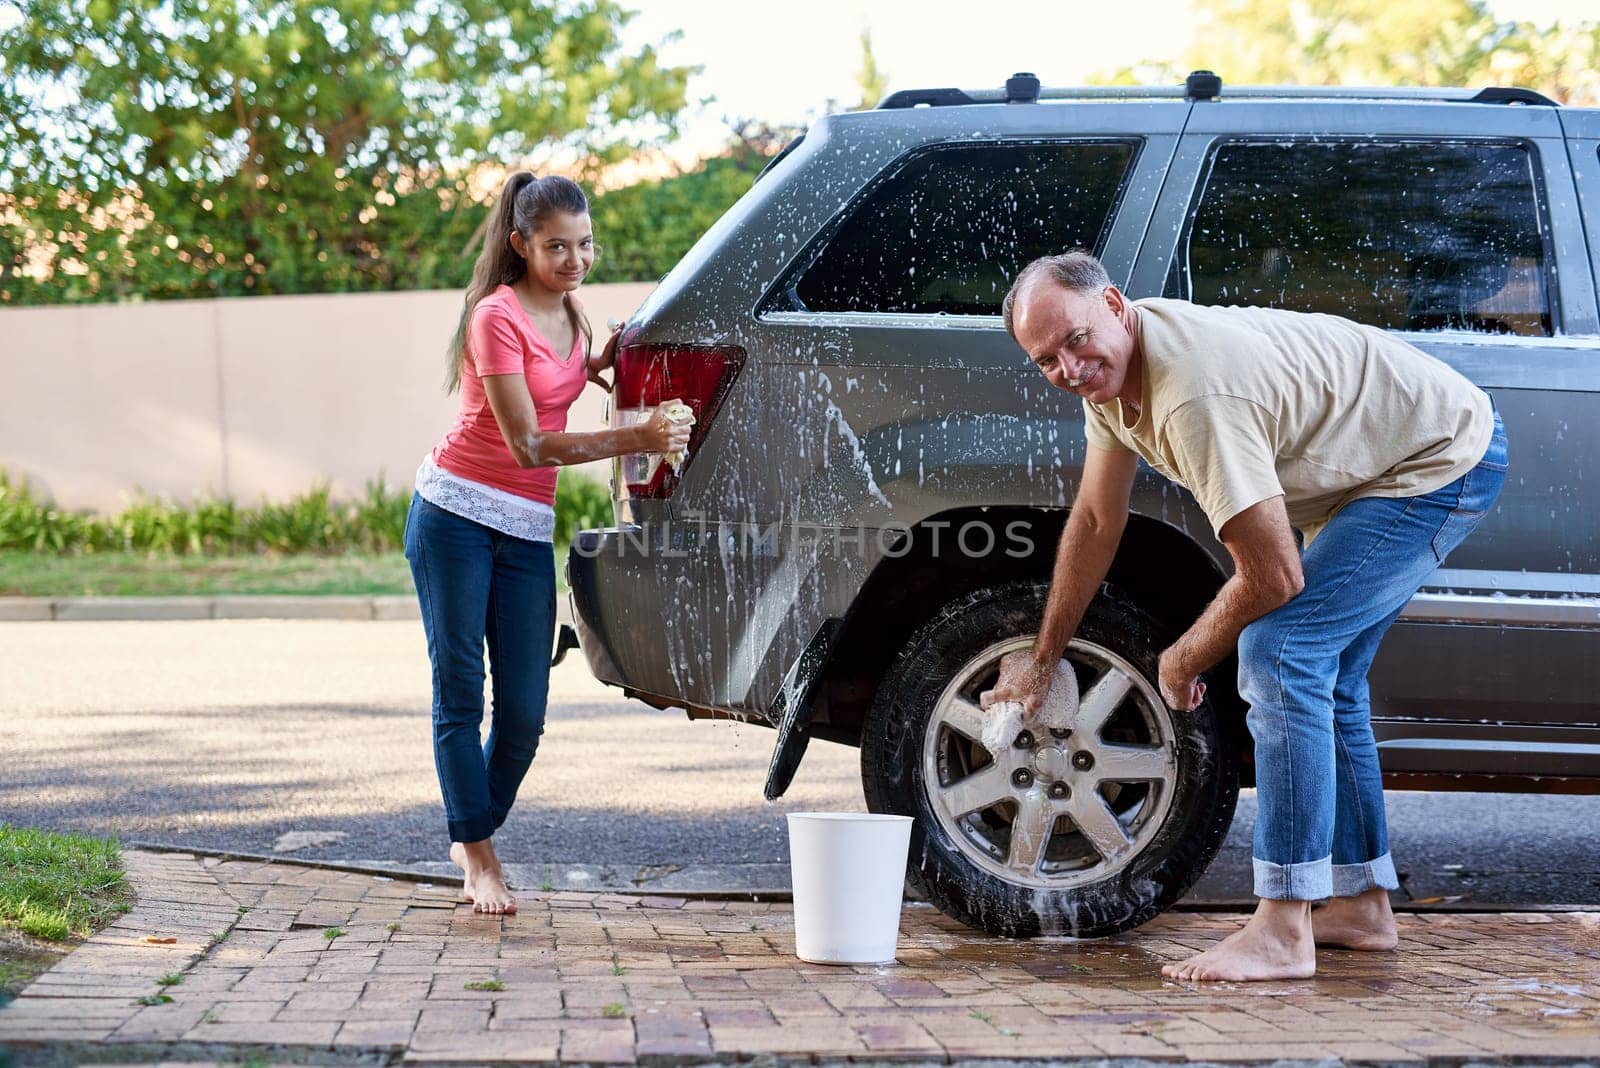 Portrait, family and washing car with soap, cloth and quality time on driveway. Cleaning transport, outdoor and face of father with young daughter with water, barefoot together and weekend chores by YuriArcurs